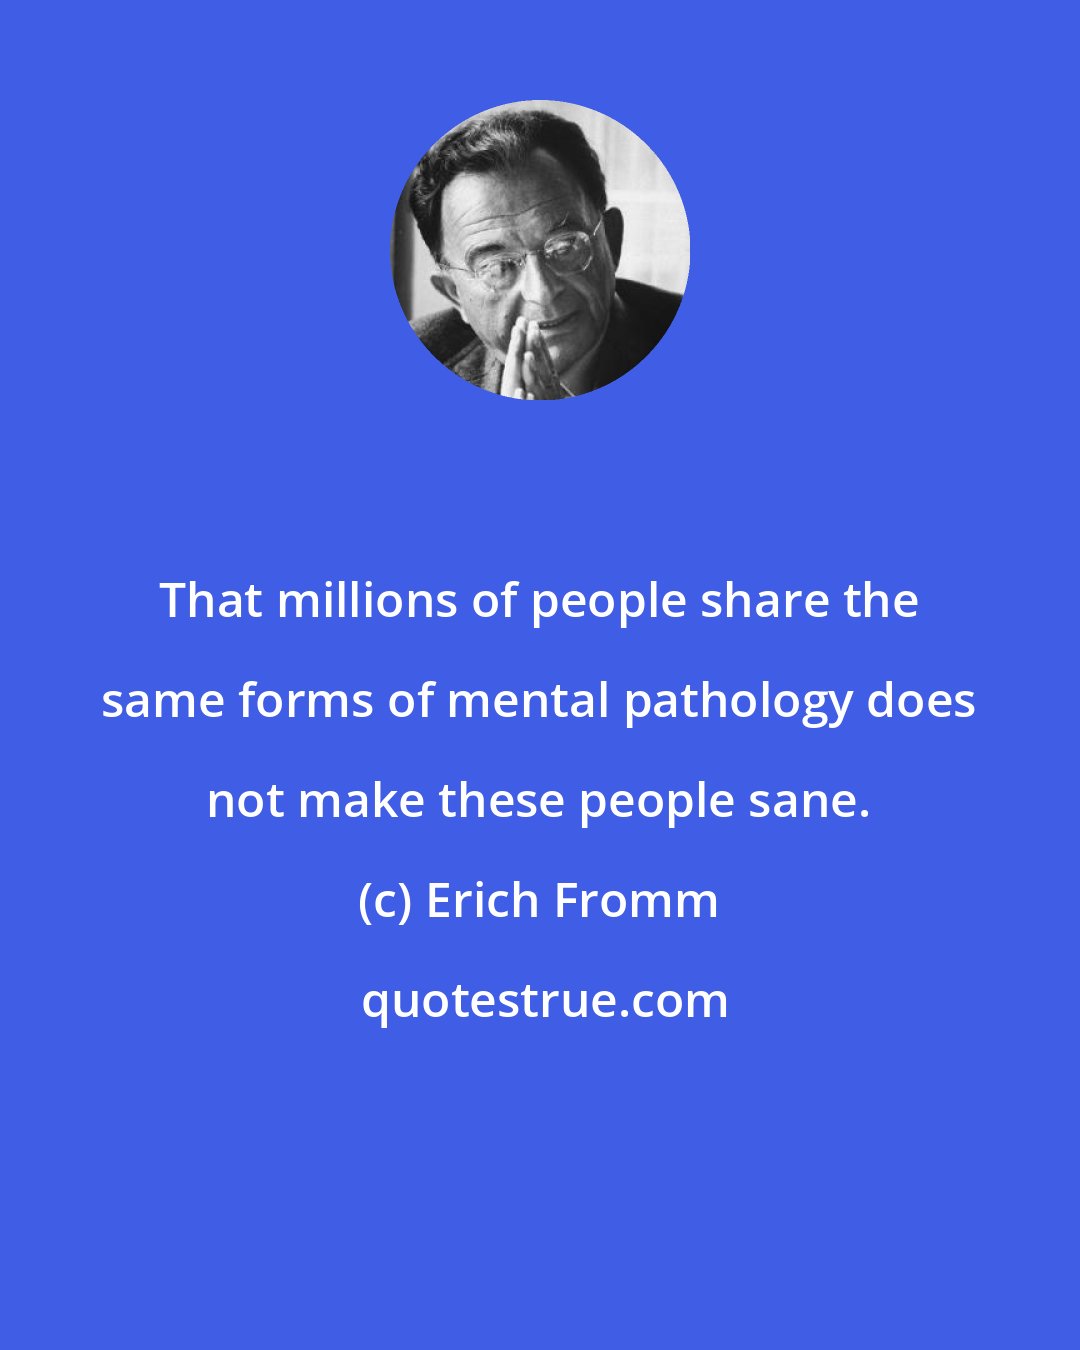 Erich Fromm: That millions of people share the same forms of mental pathology does not make these people sane.